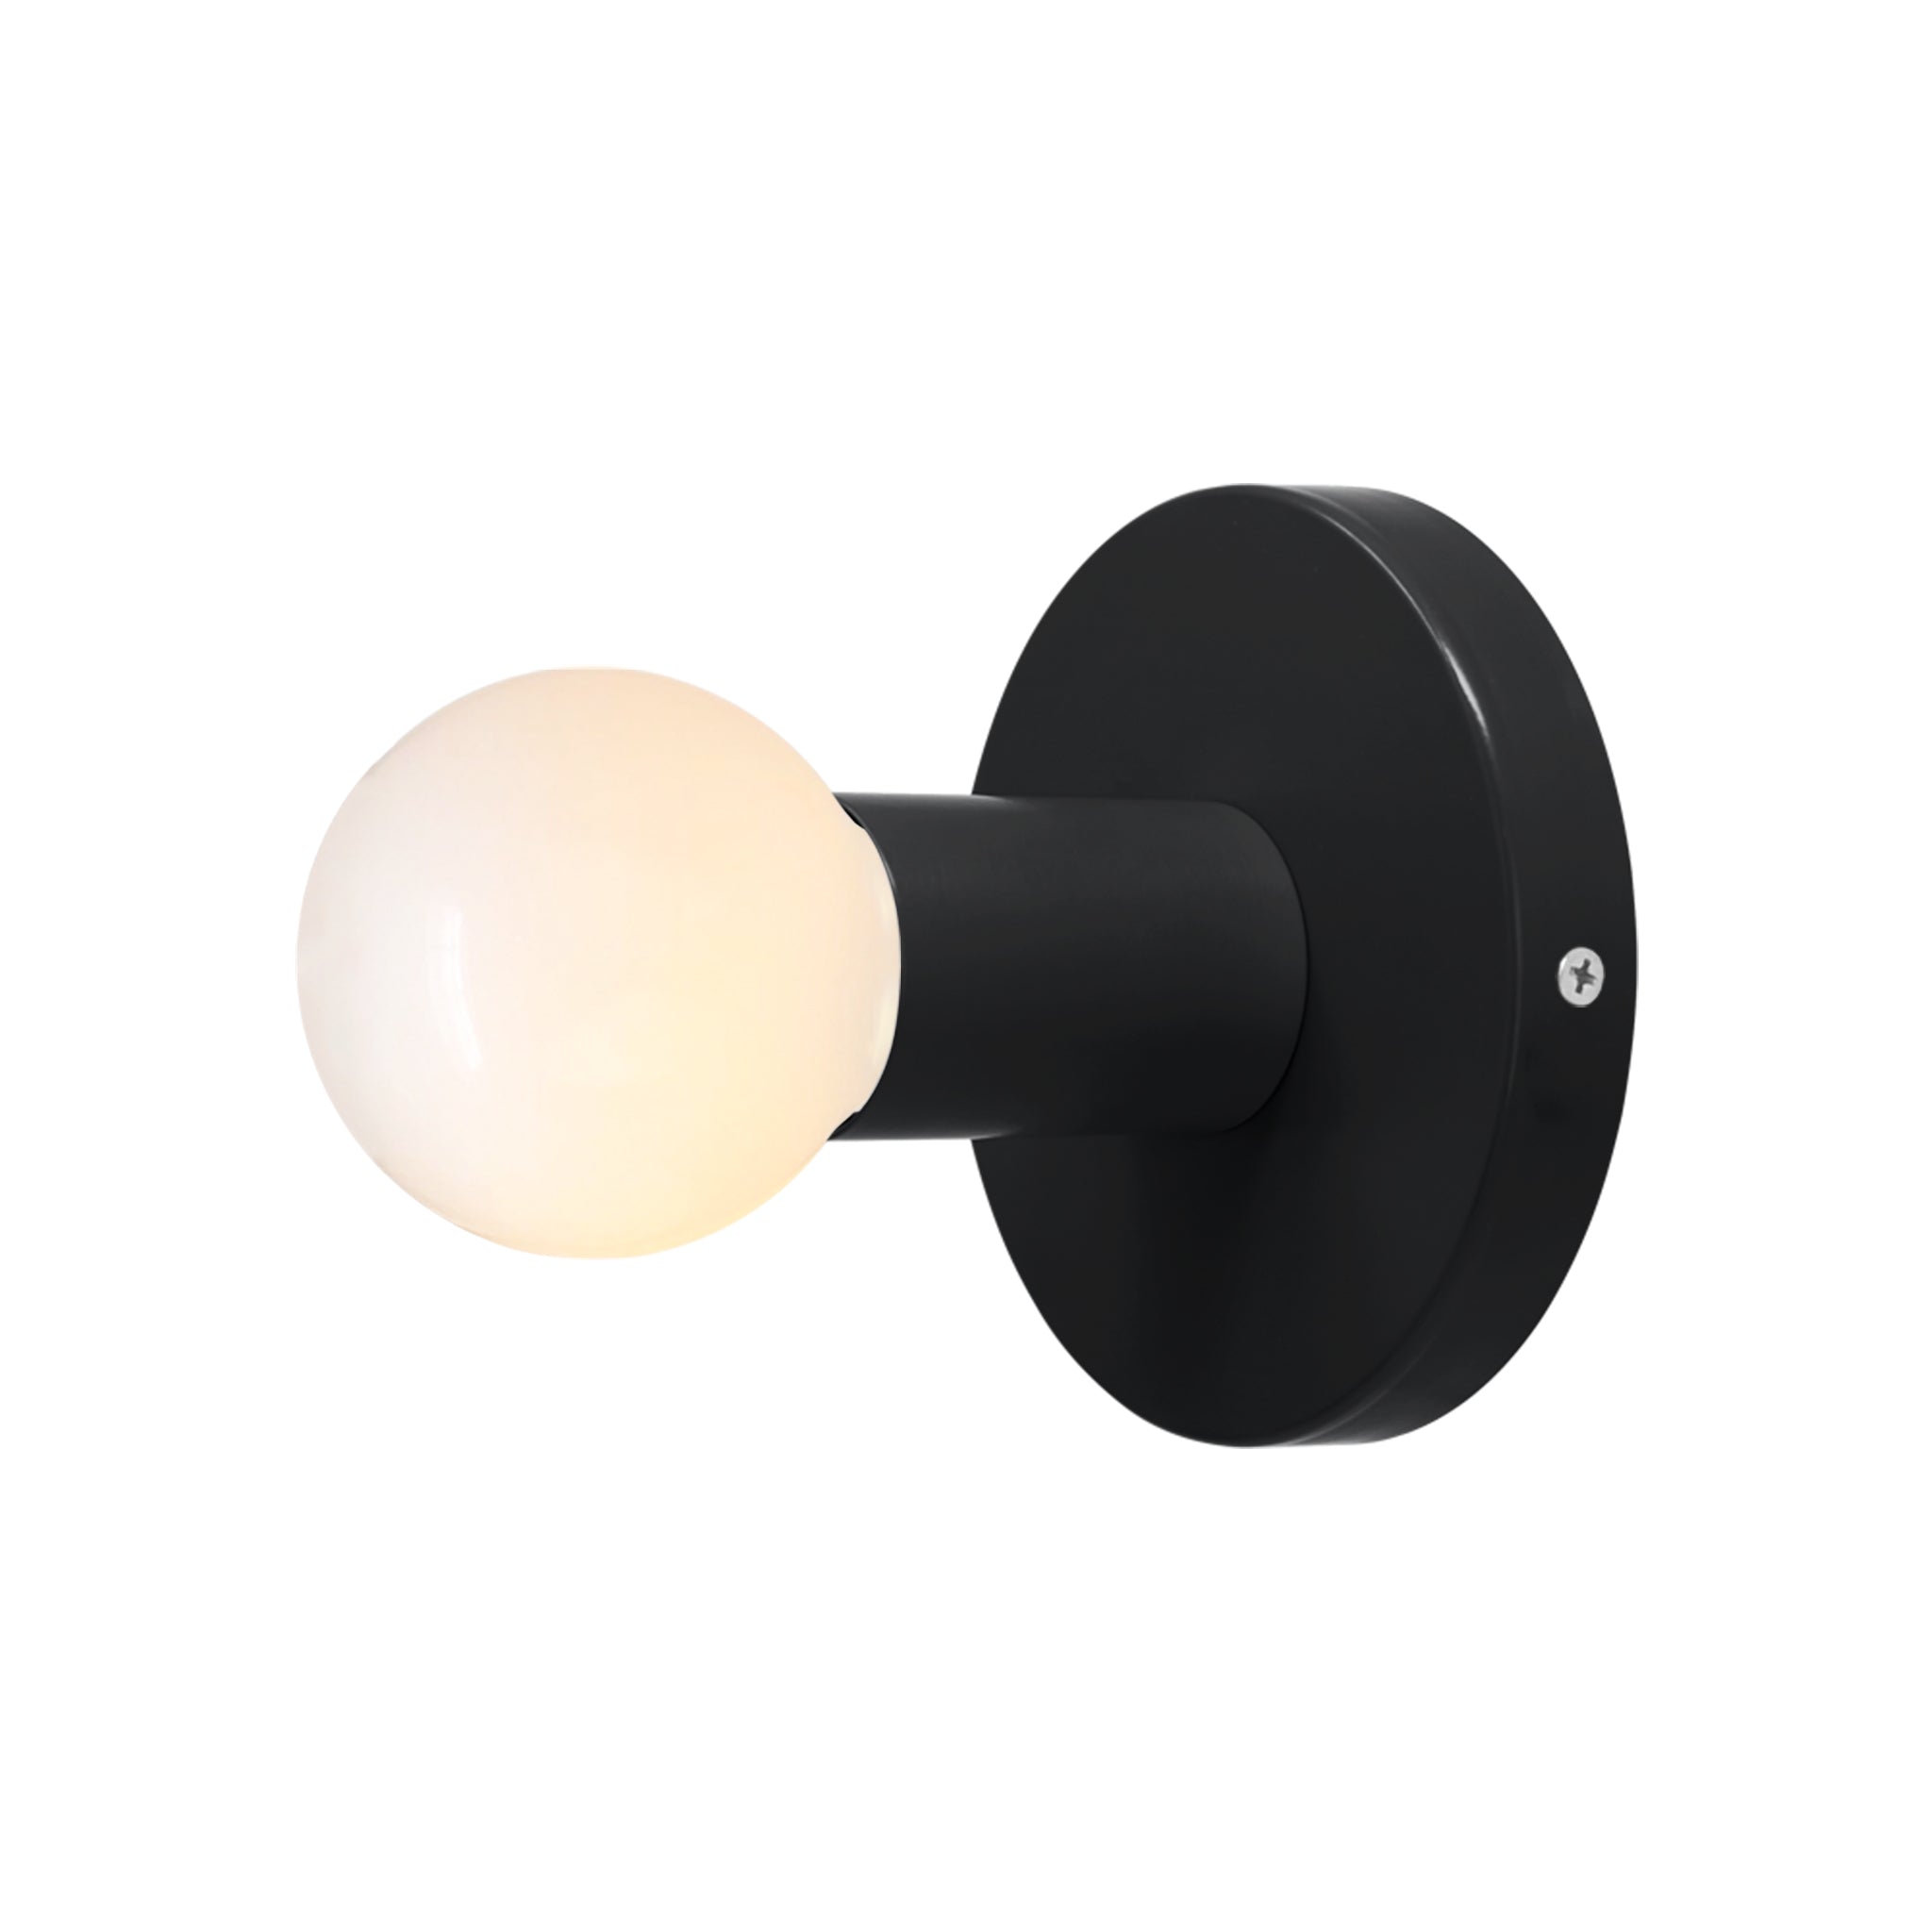 Nickel and black color Twink sconce Dutton Brown lighting